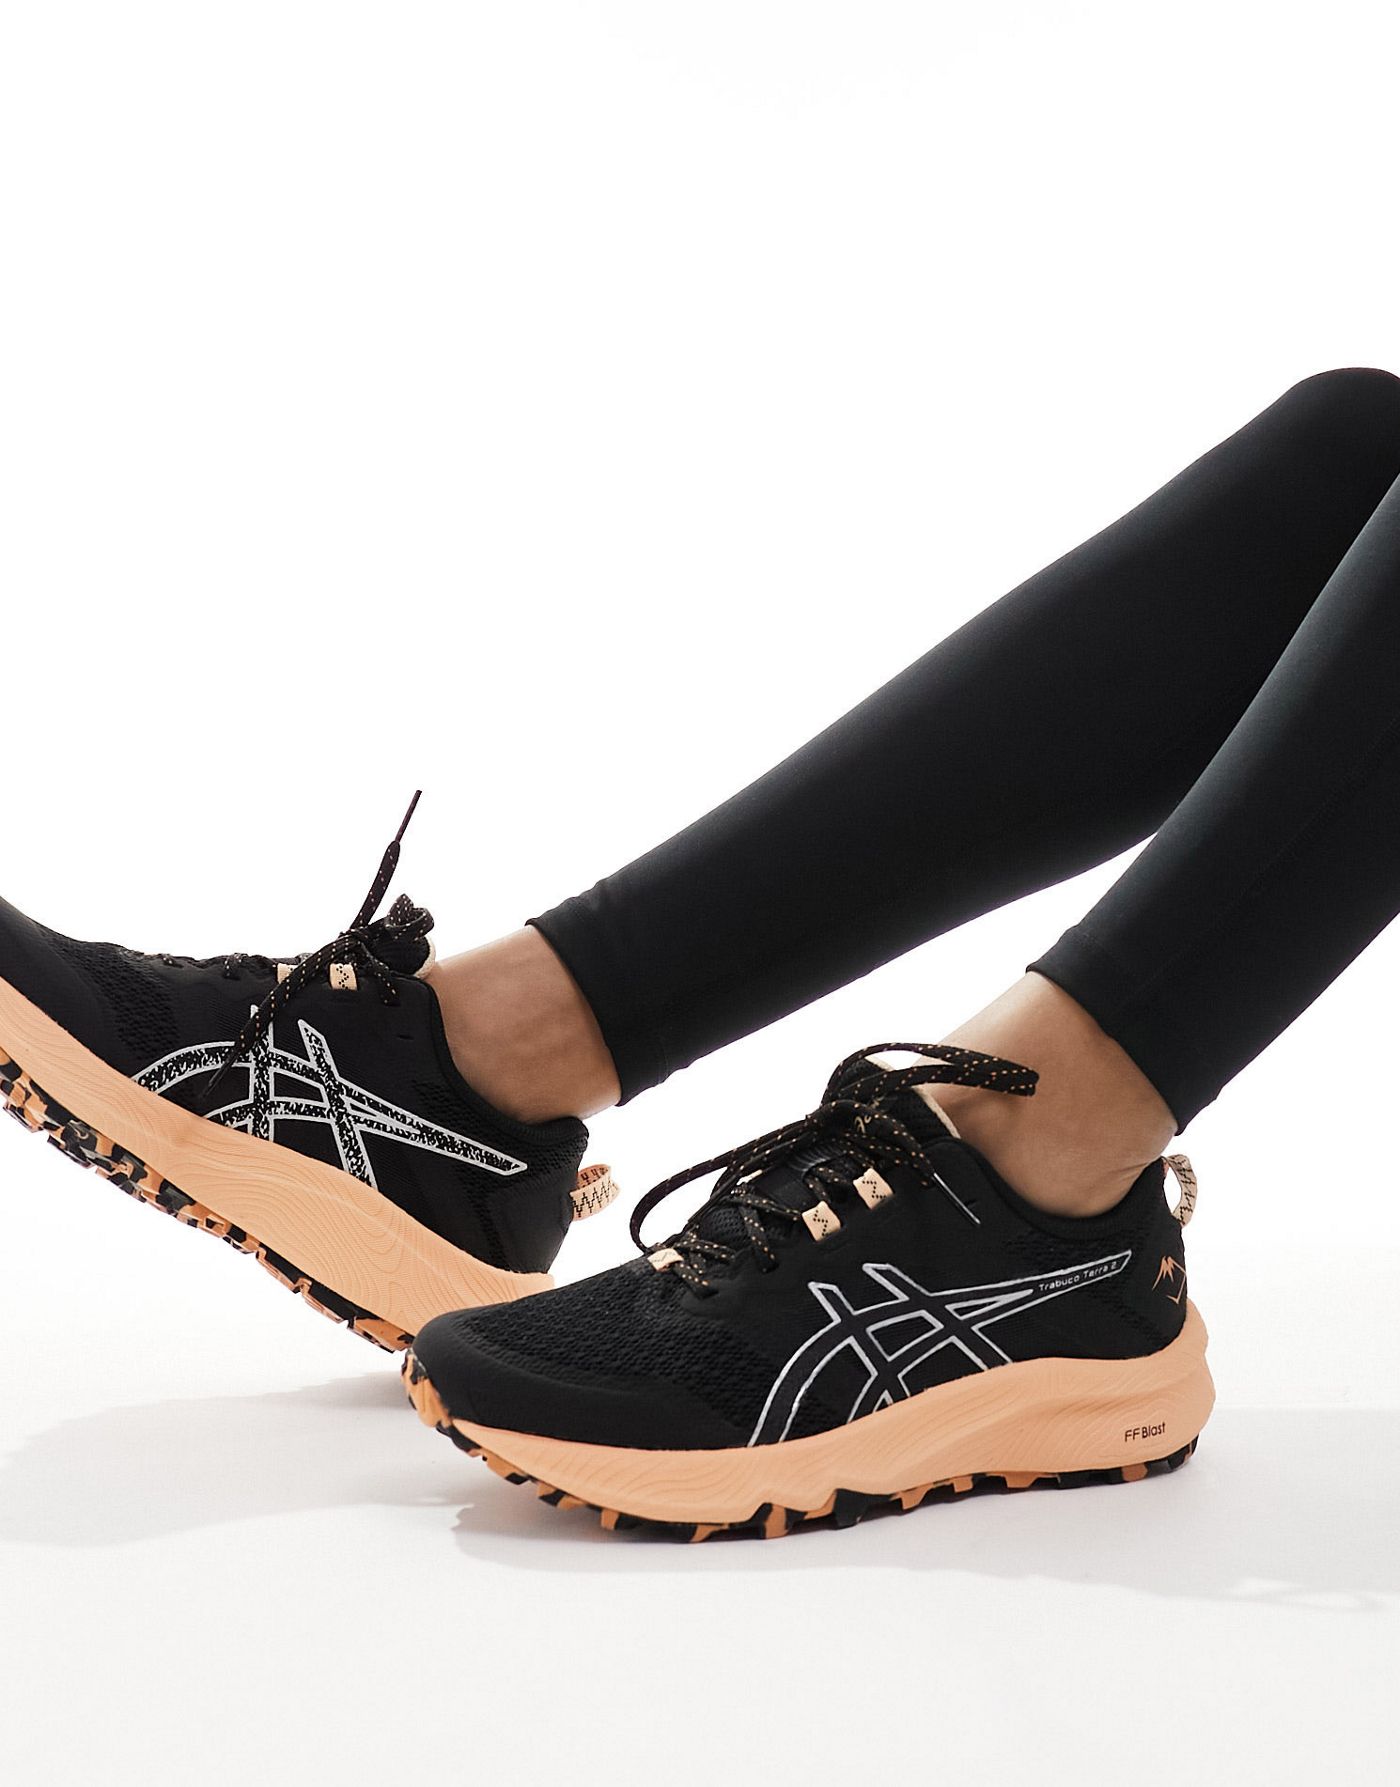 Asics Trabuco Terra 2 trail running chunky sole trainers in black and peach